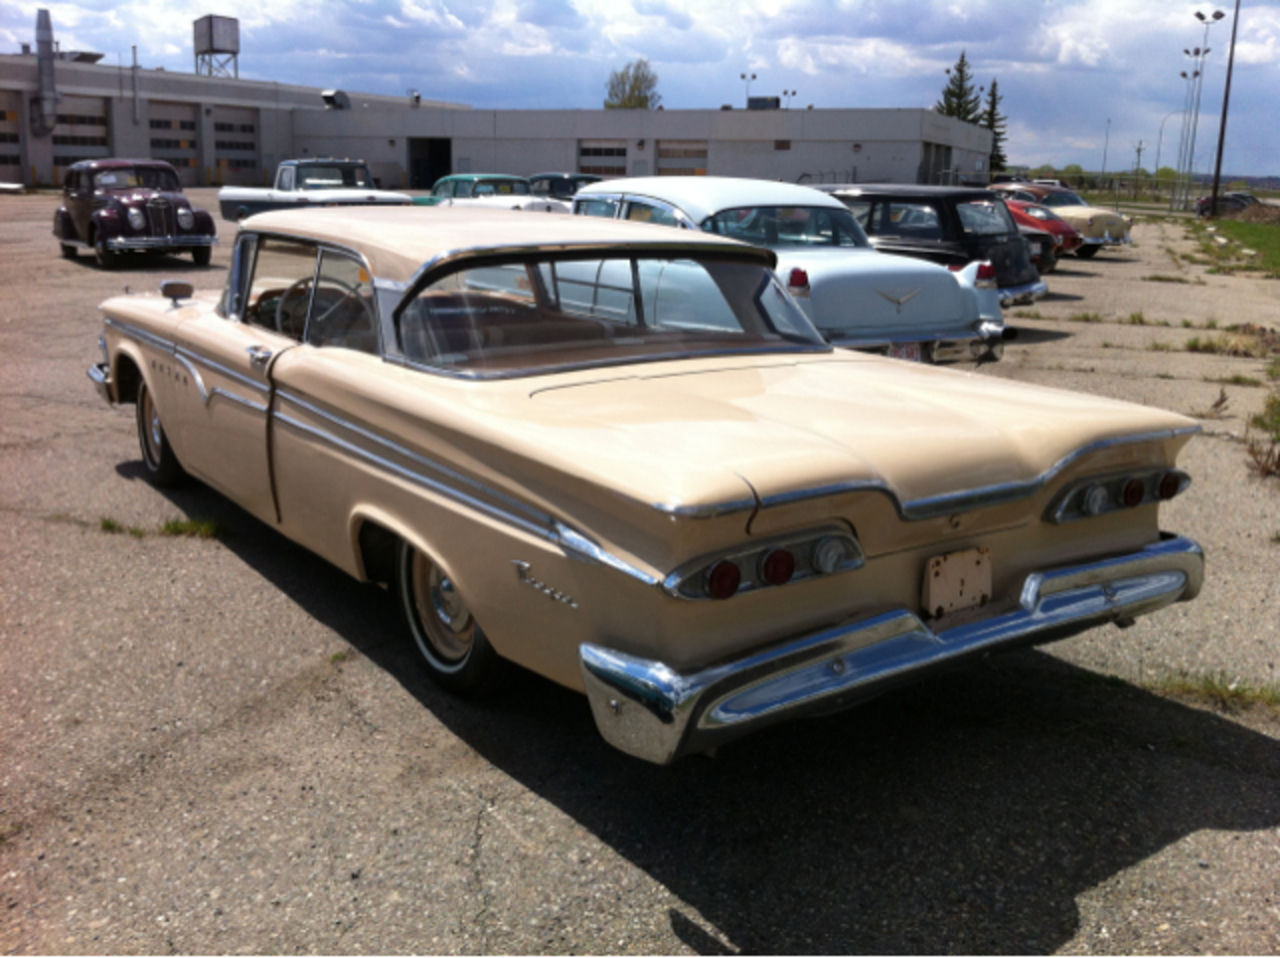 1959 Edsel Ranger for sale in Olds, AB for $0.0. Exterior Color is ...